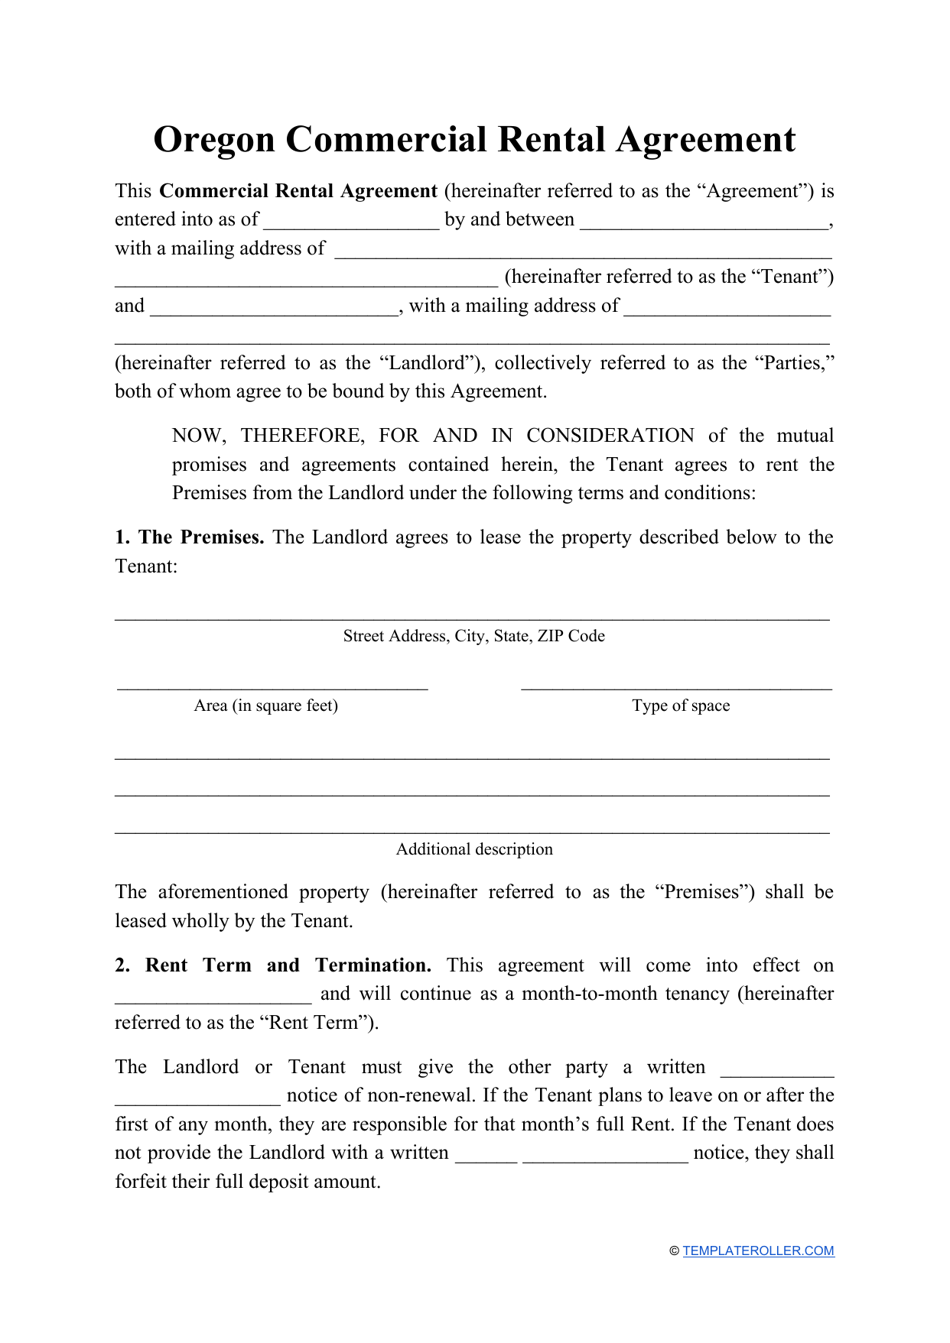 Commercial Rental Agreement Template - Oregon, Page 1